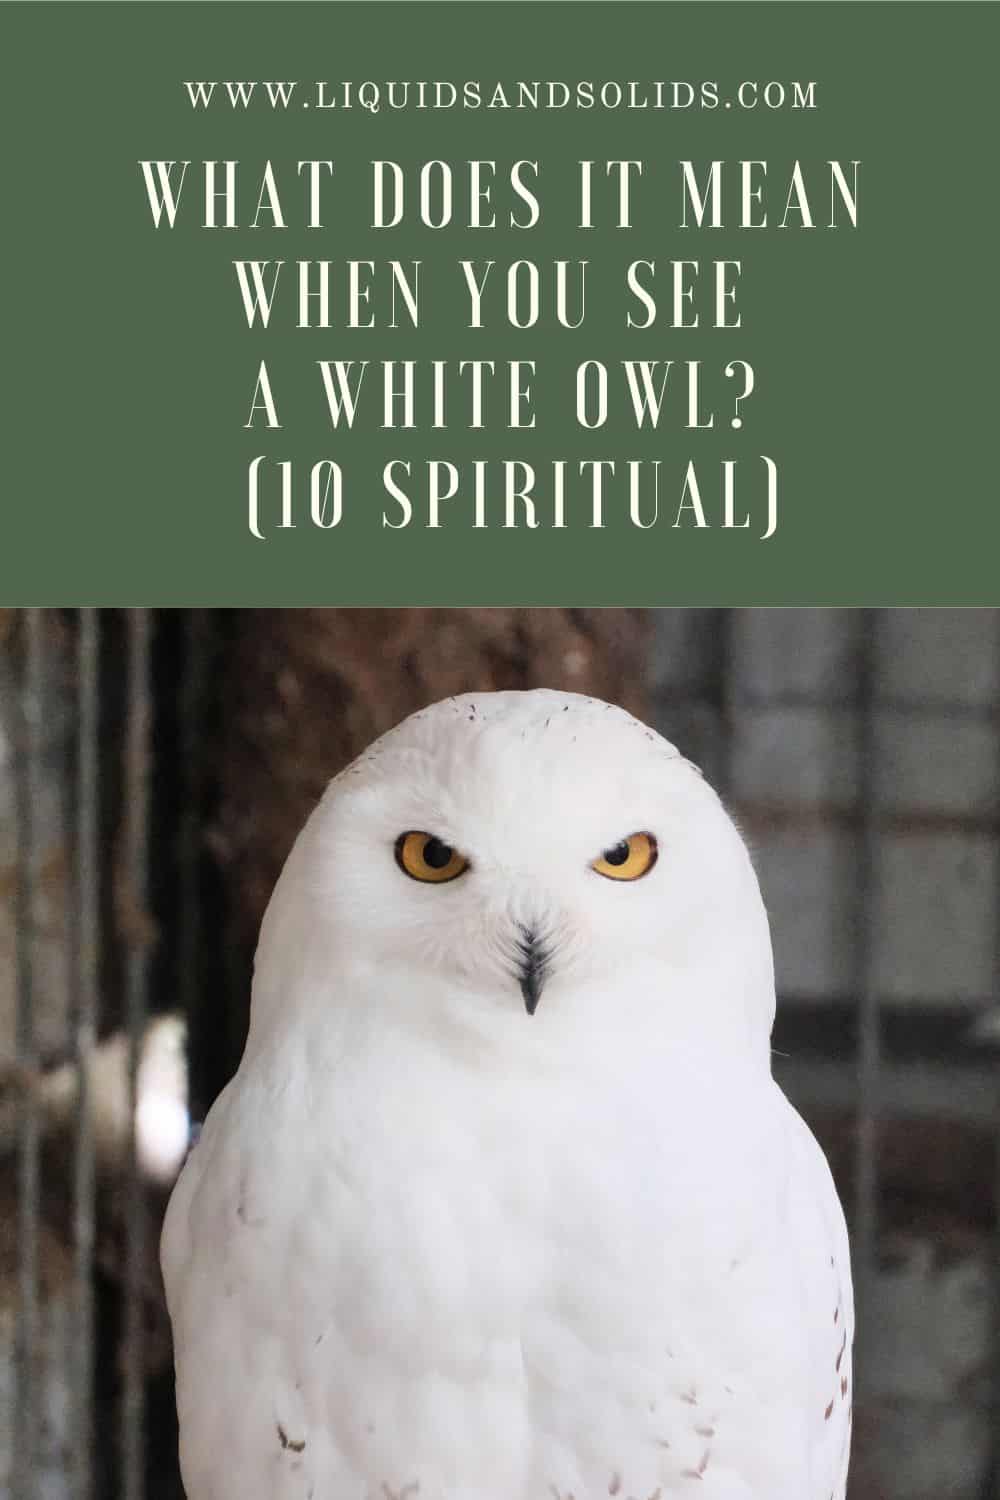 What Does It Mean When You See A White Owl?